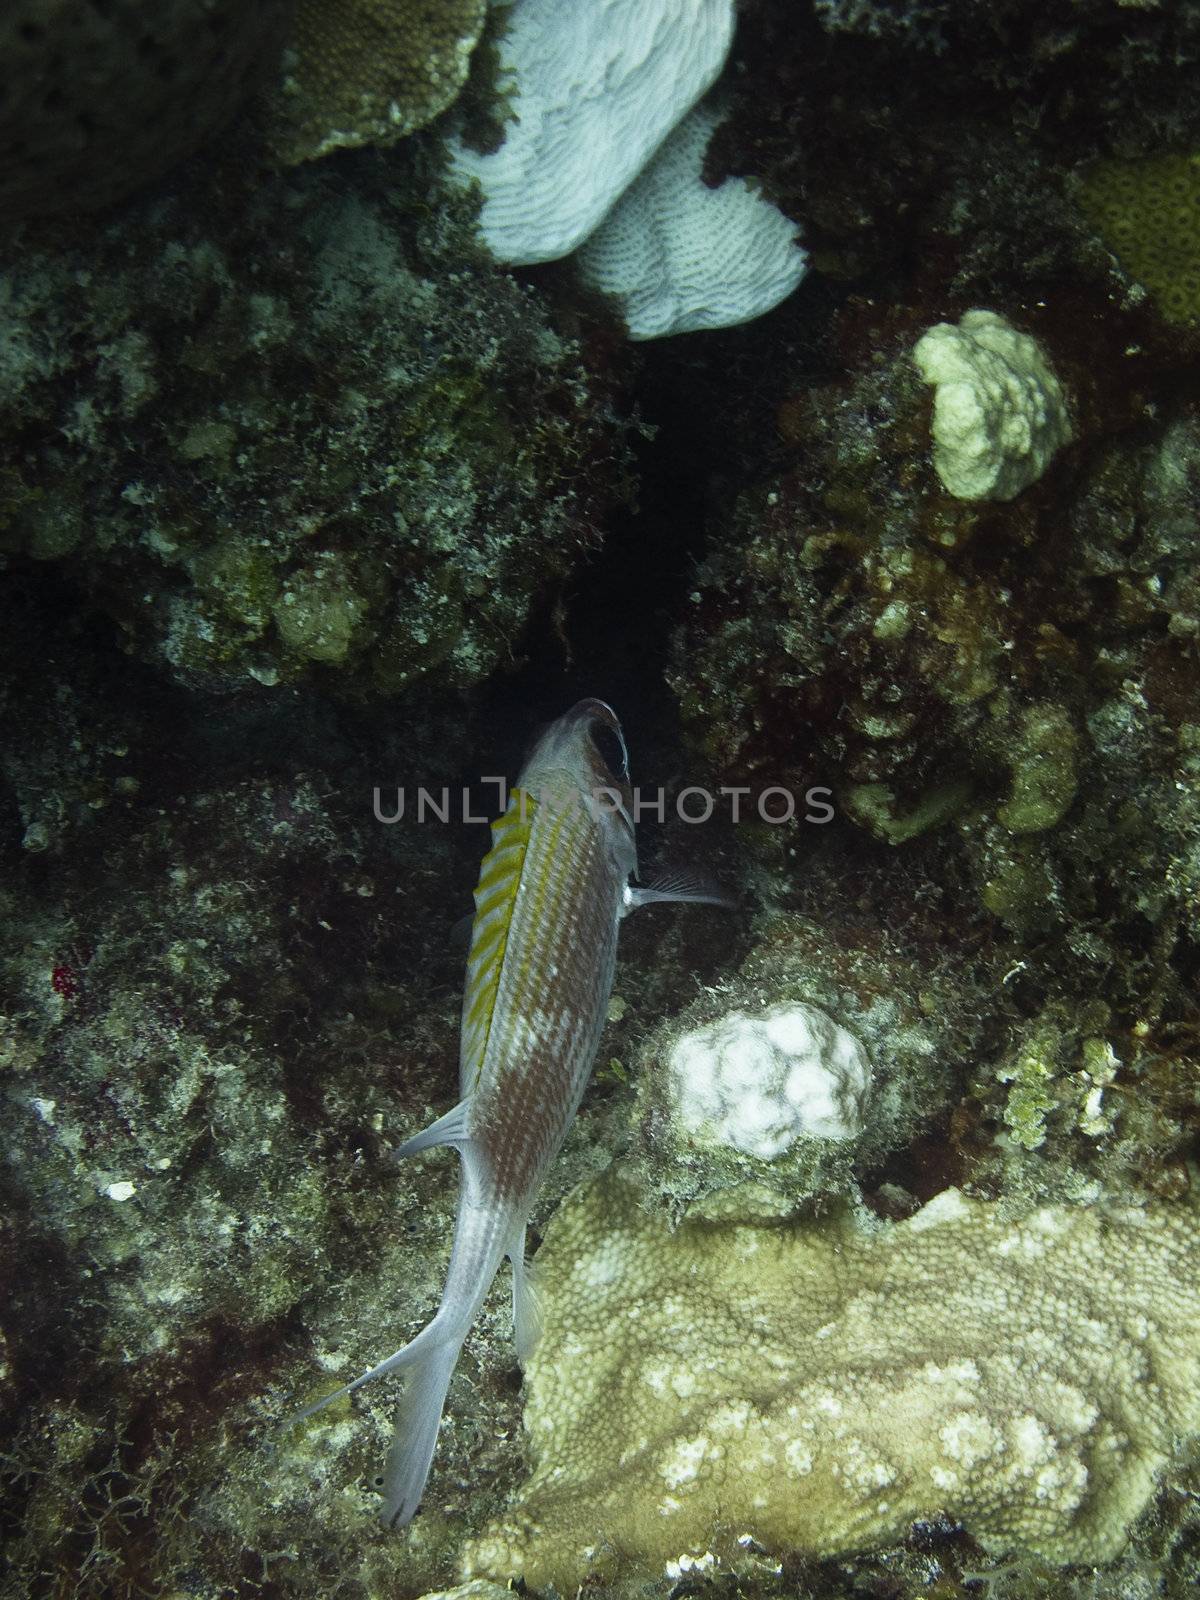 Underwater photo of a fish in a coral reef